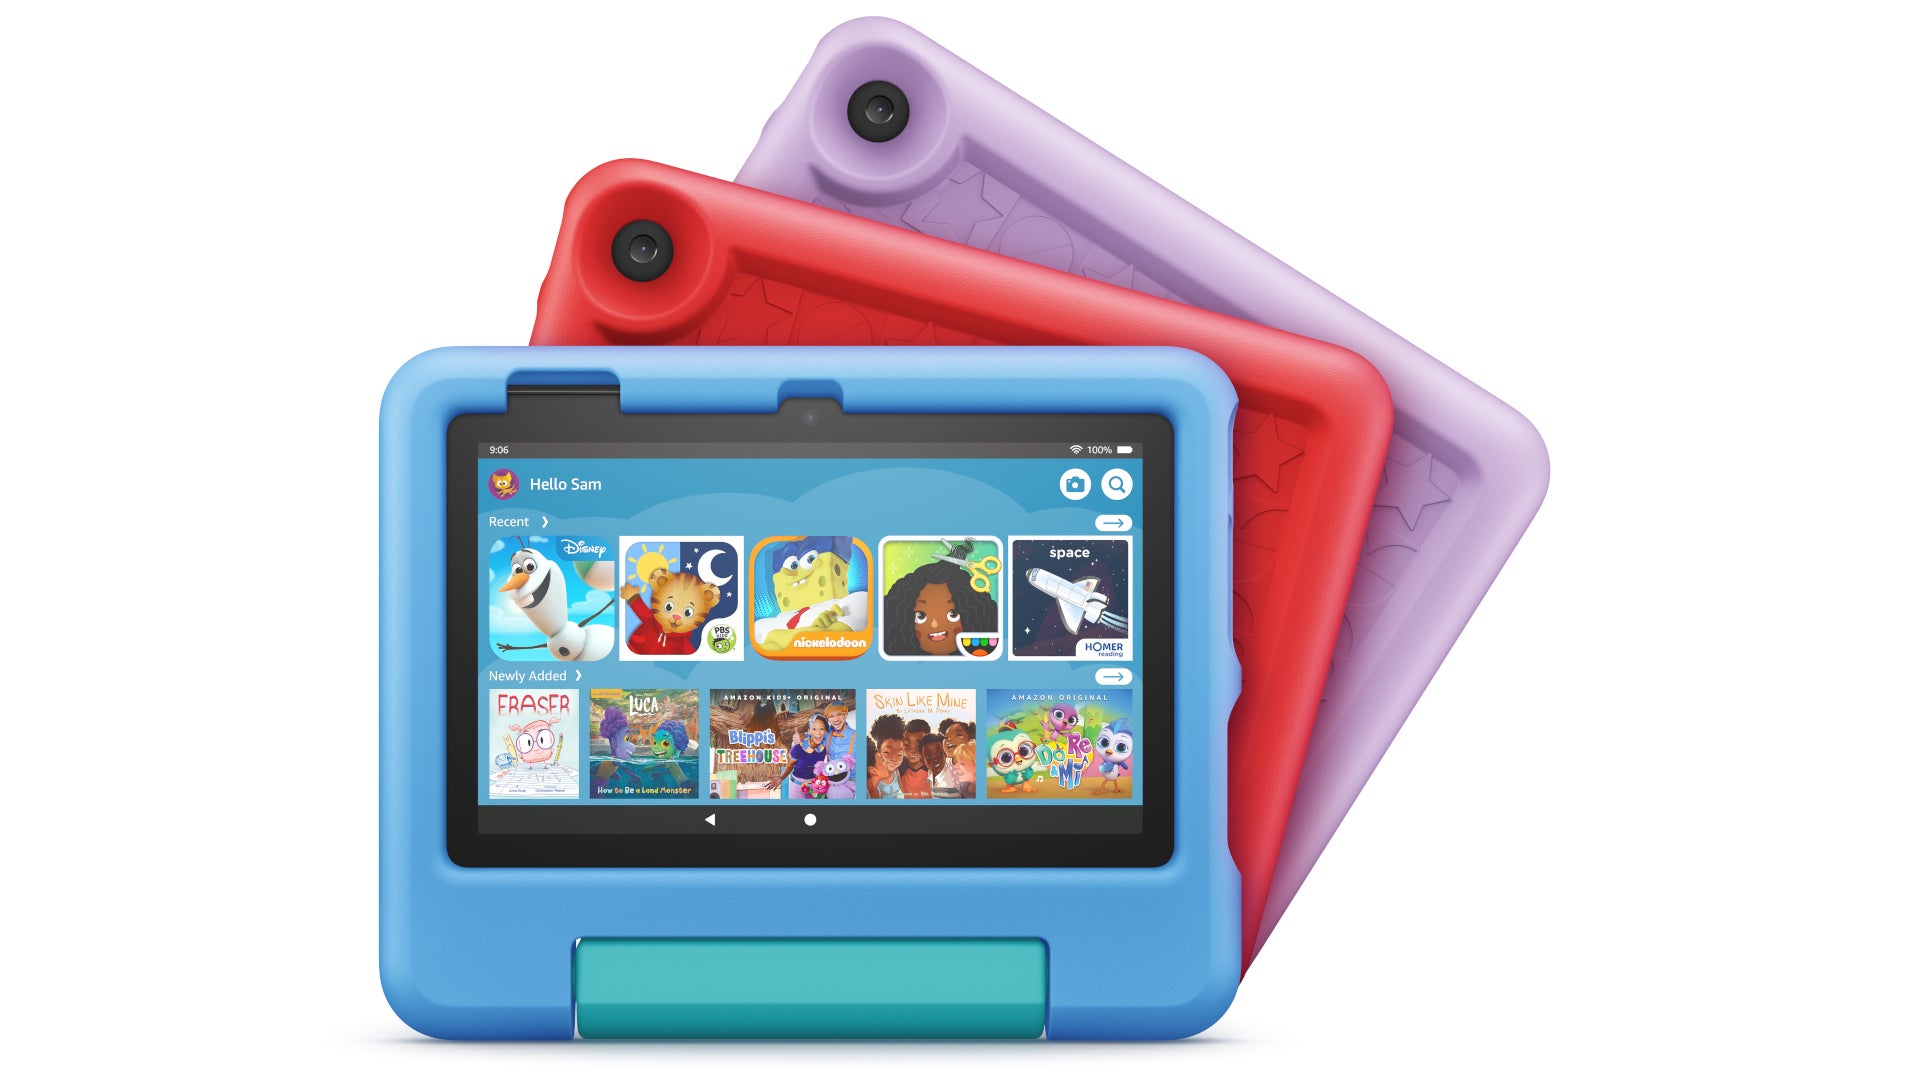 Amazon introduces the next-generation Fire 7 and Fire 7 Kids tablets